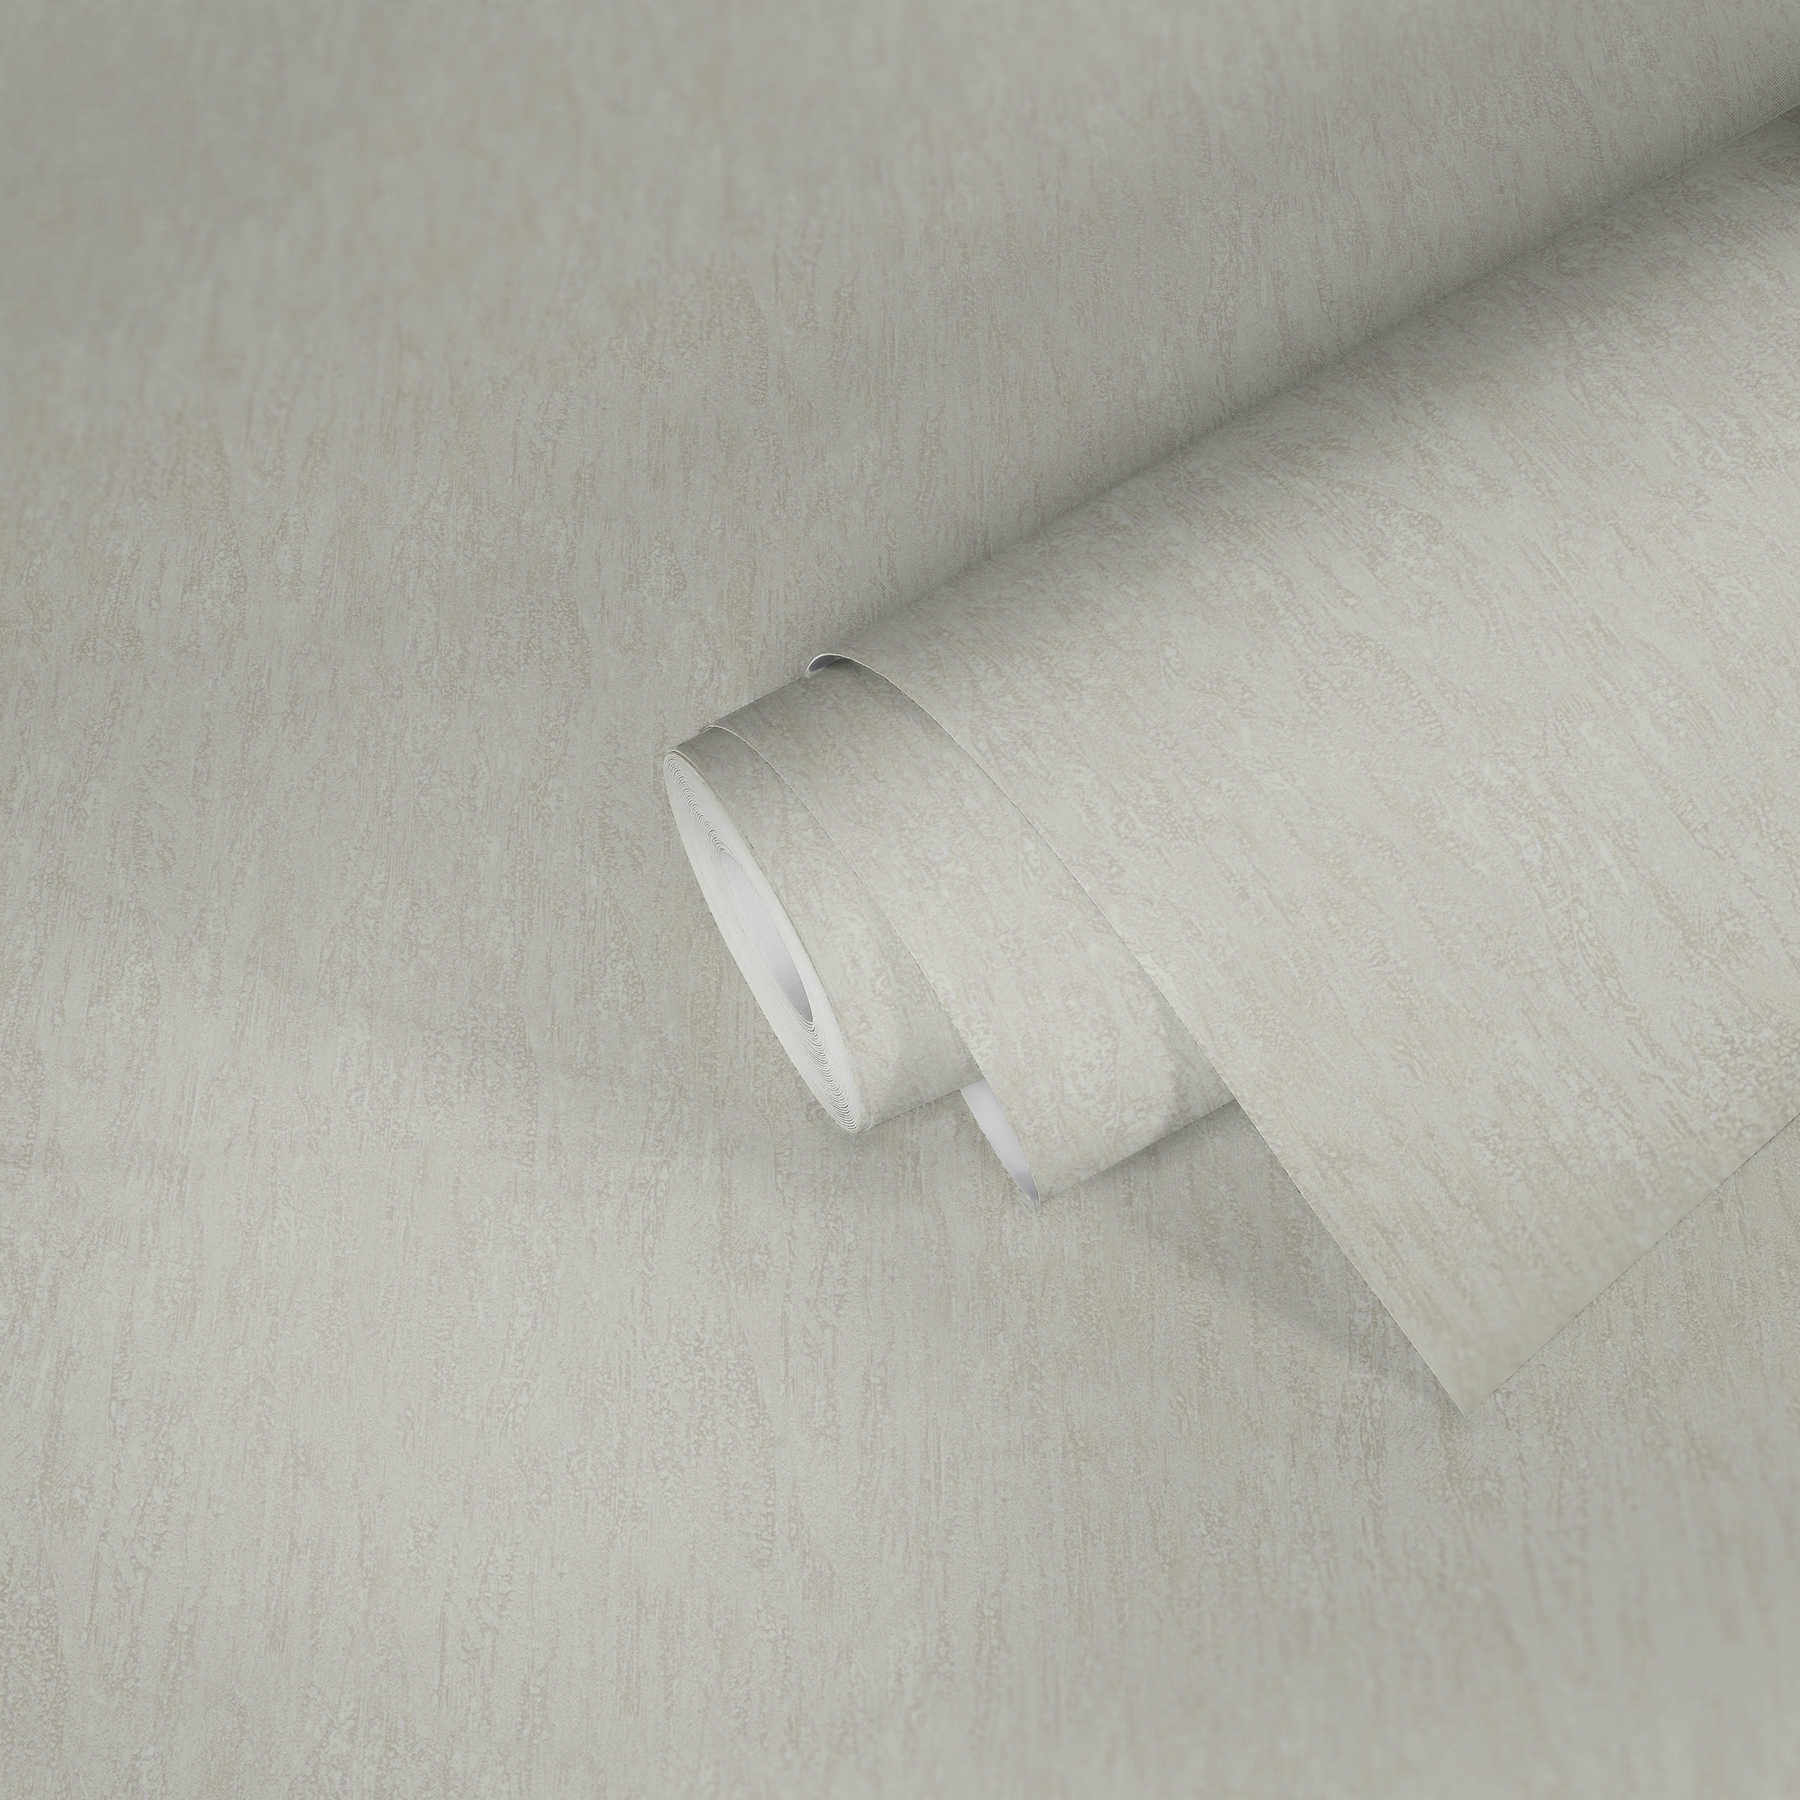             Textured wallpaper with natural embossed pattern in plain - cream
        